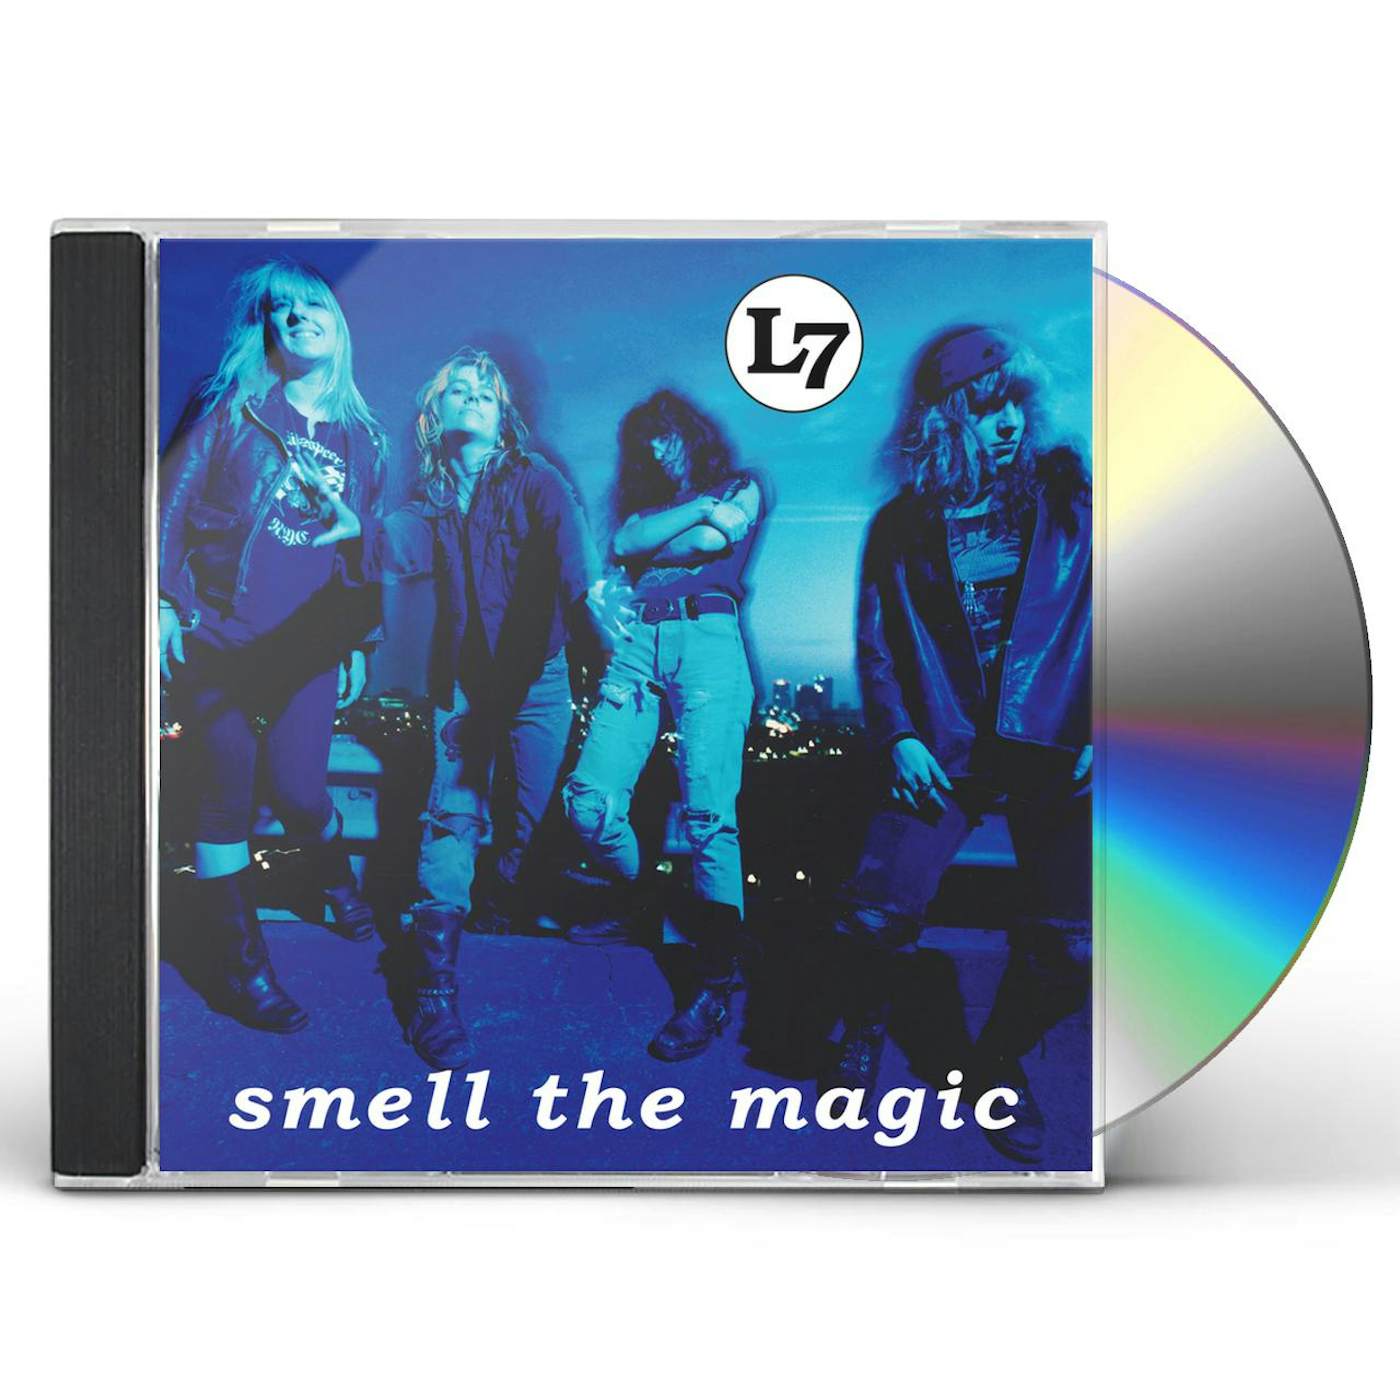 L7 SMELL THE MAGIC CD